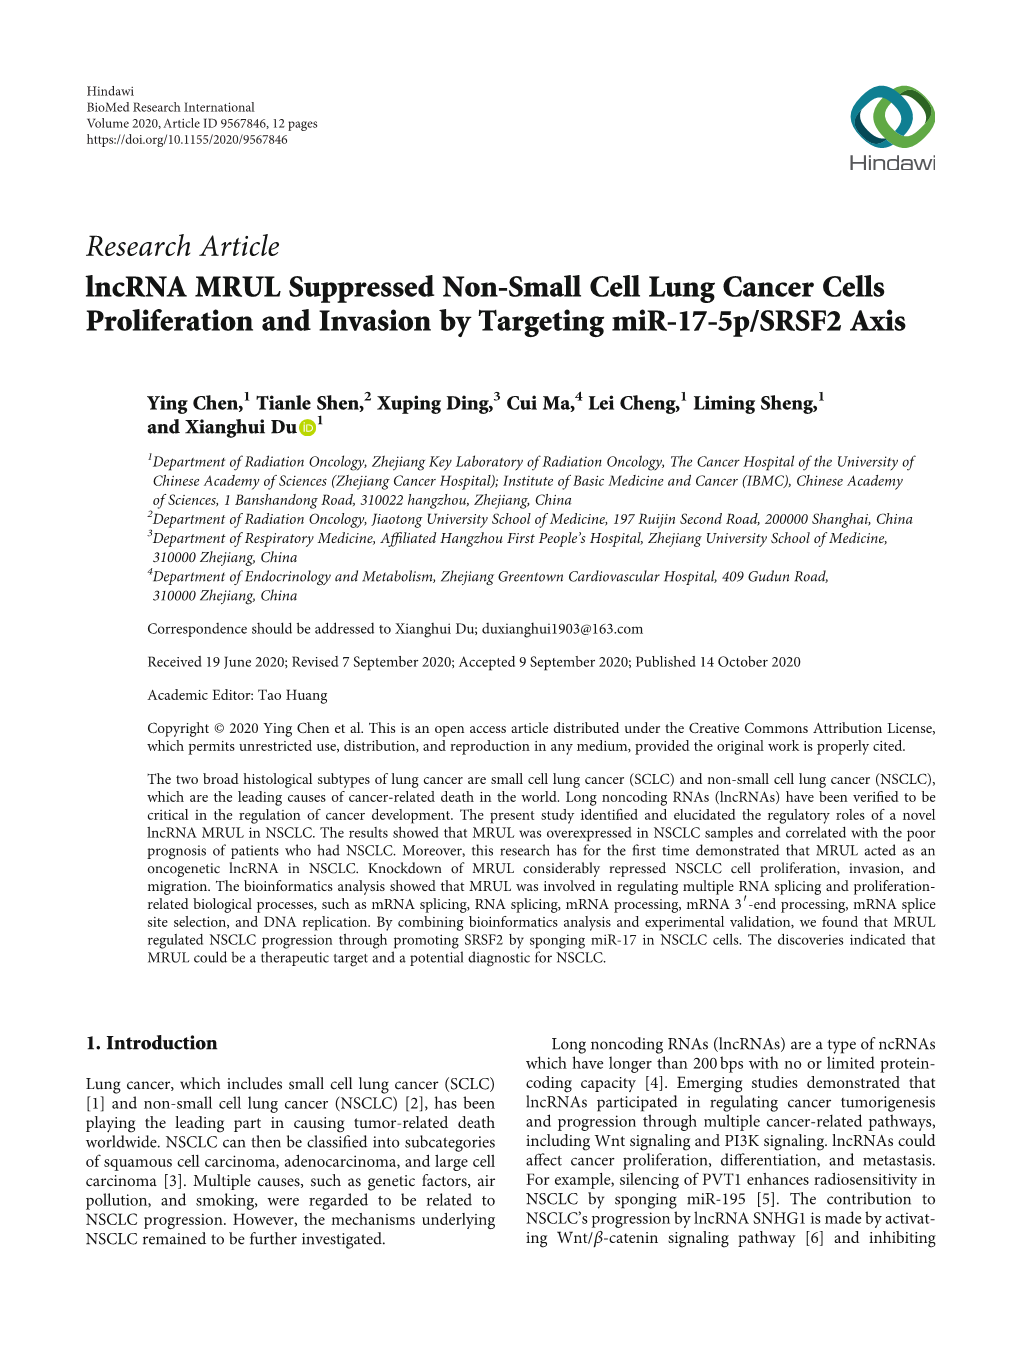 Research Article Lncrna MRUL Suppressed Non-Small Cell Lung Cancer Cells Proliferation and Invasion by Targeting Mir-17-5P/SRSF2 Axis